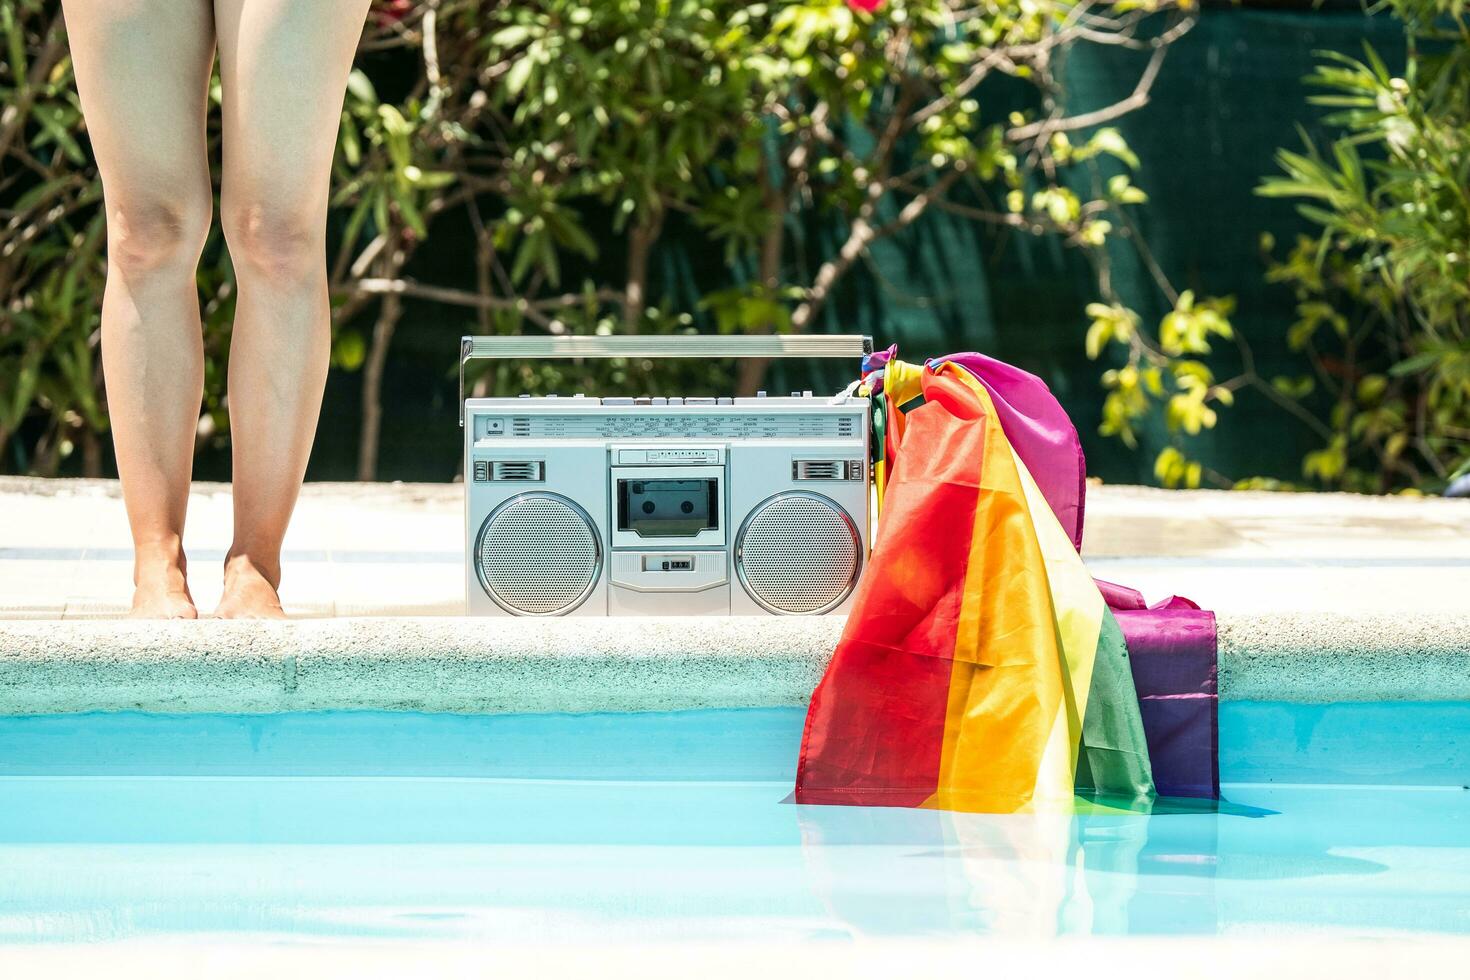 Group of friends sunbathing in the pool with old record player. lgtbi movement photo